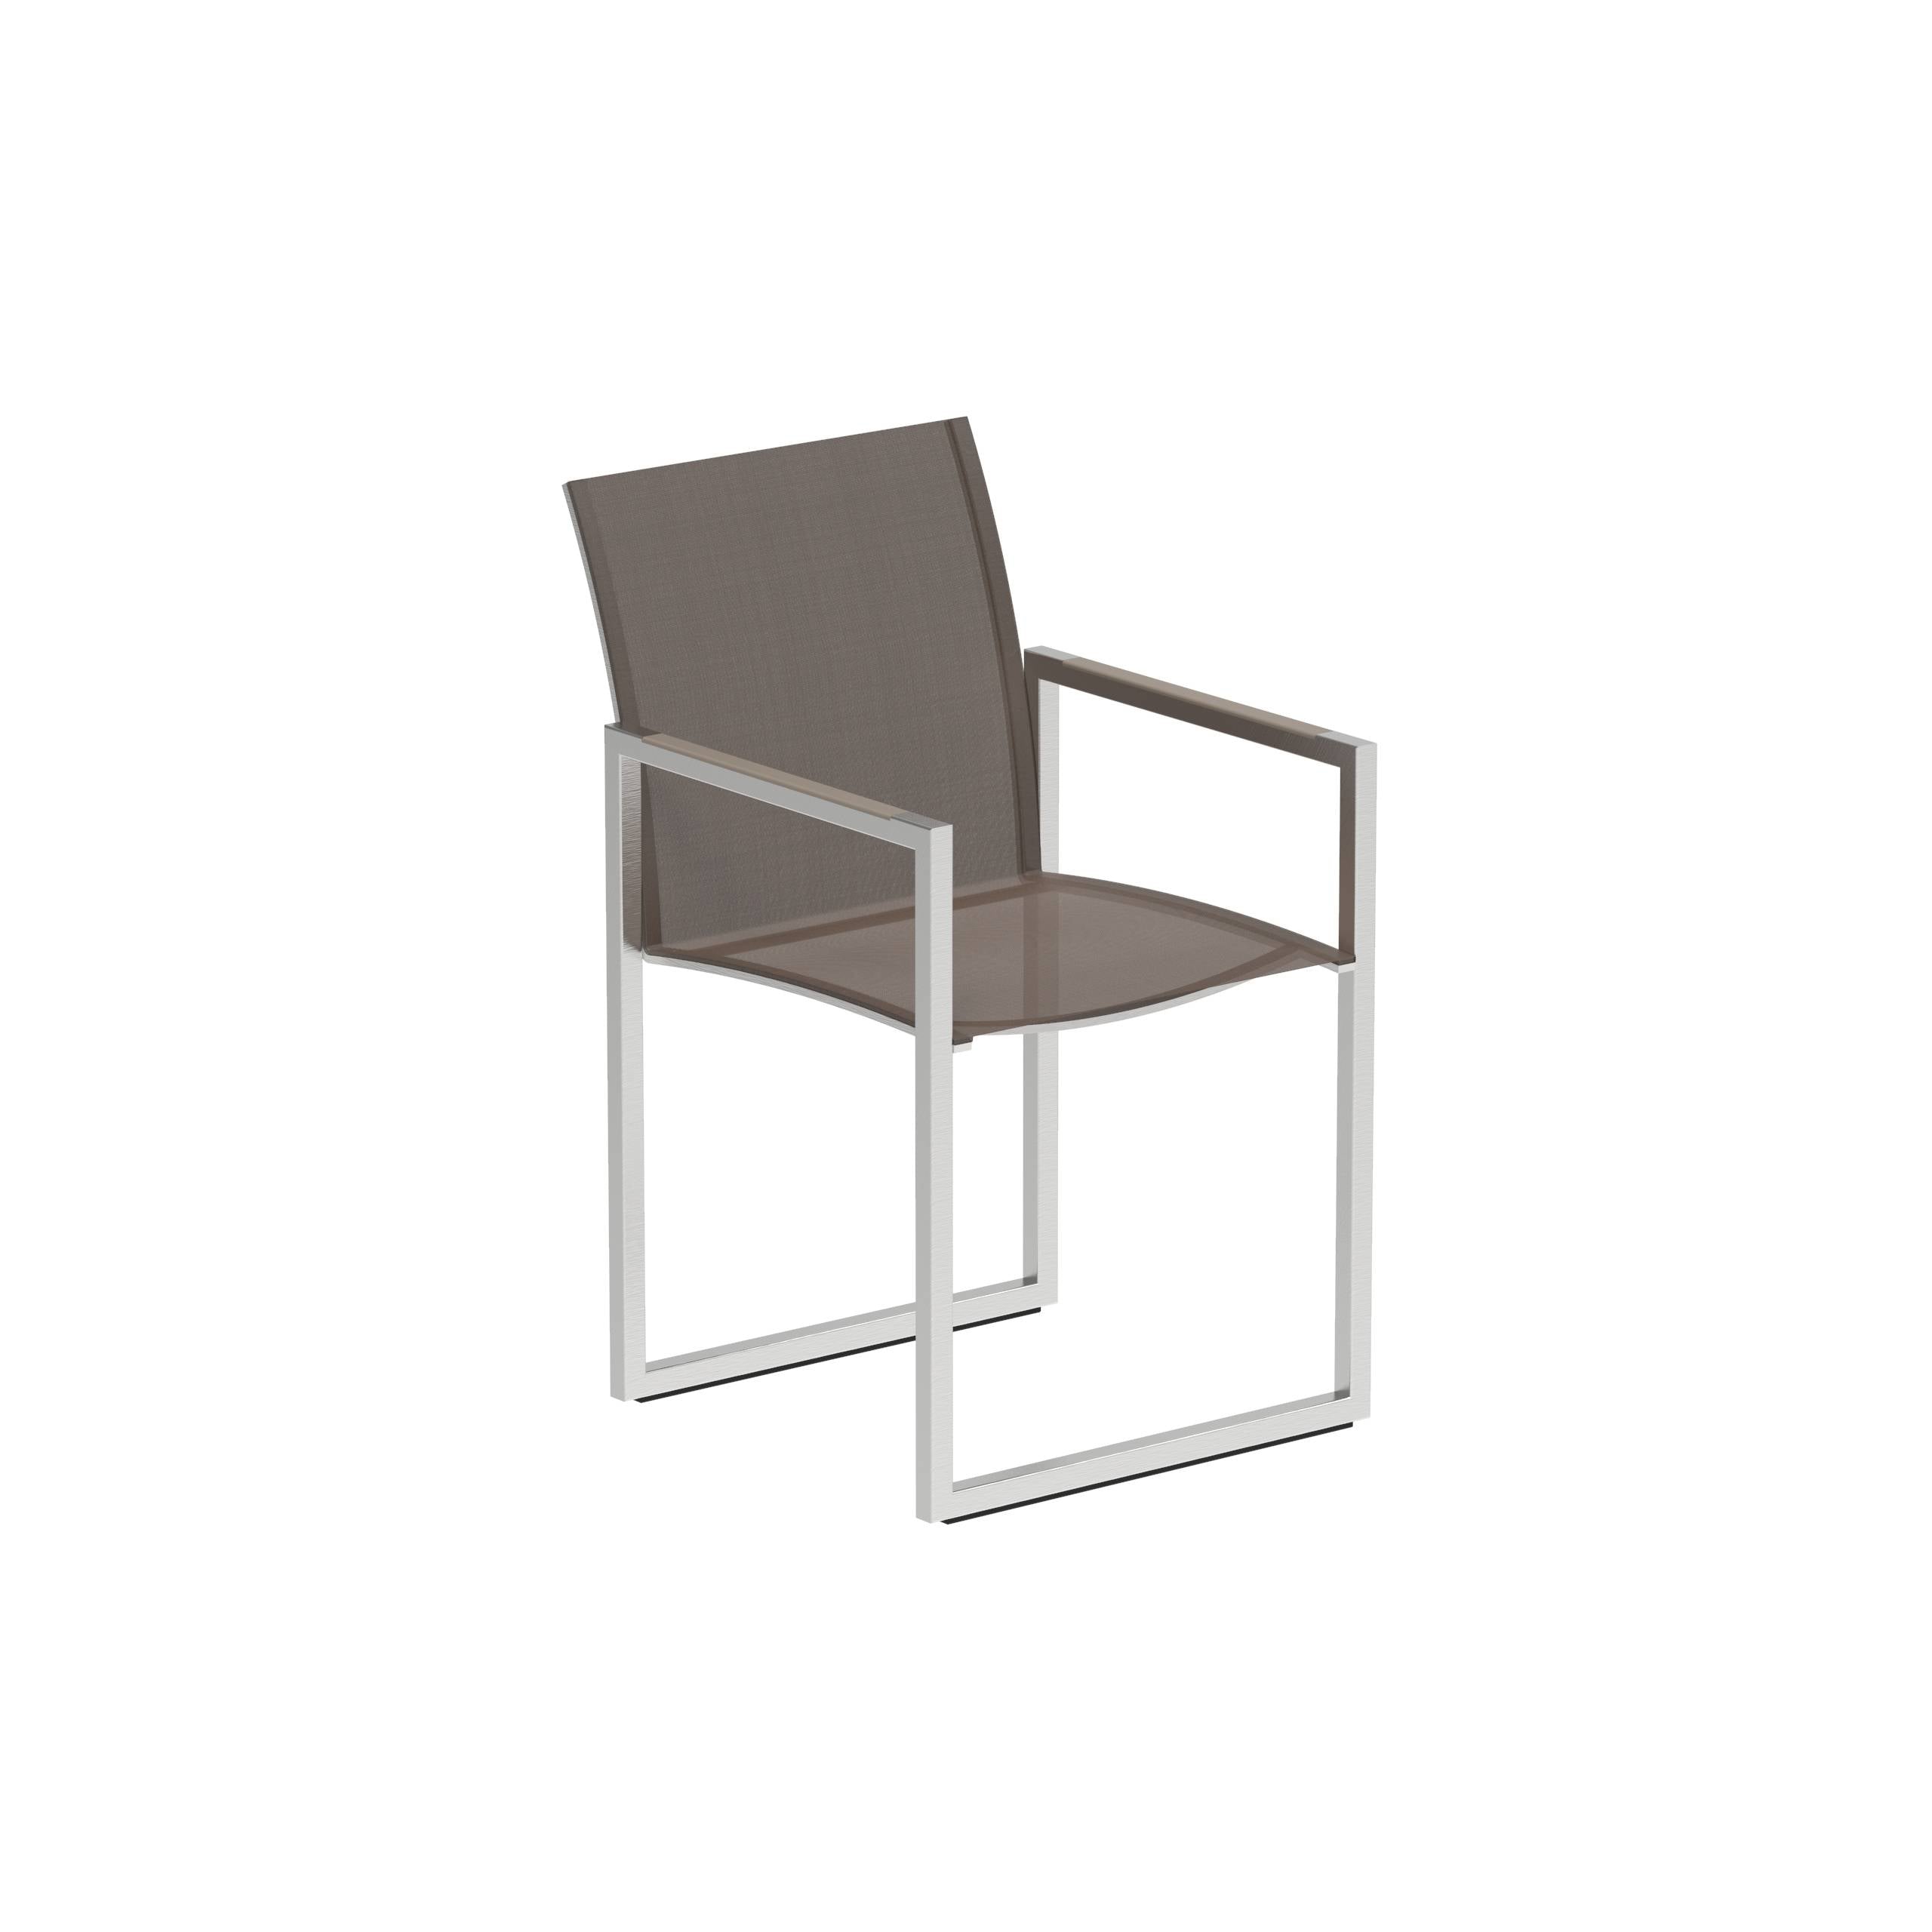 Ninix Armchair Stainless Steel El.Pol And Batyline Cappuccino